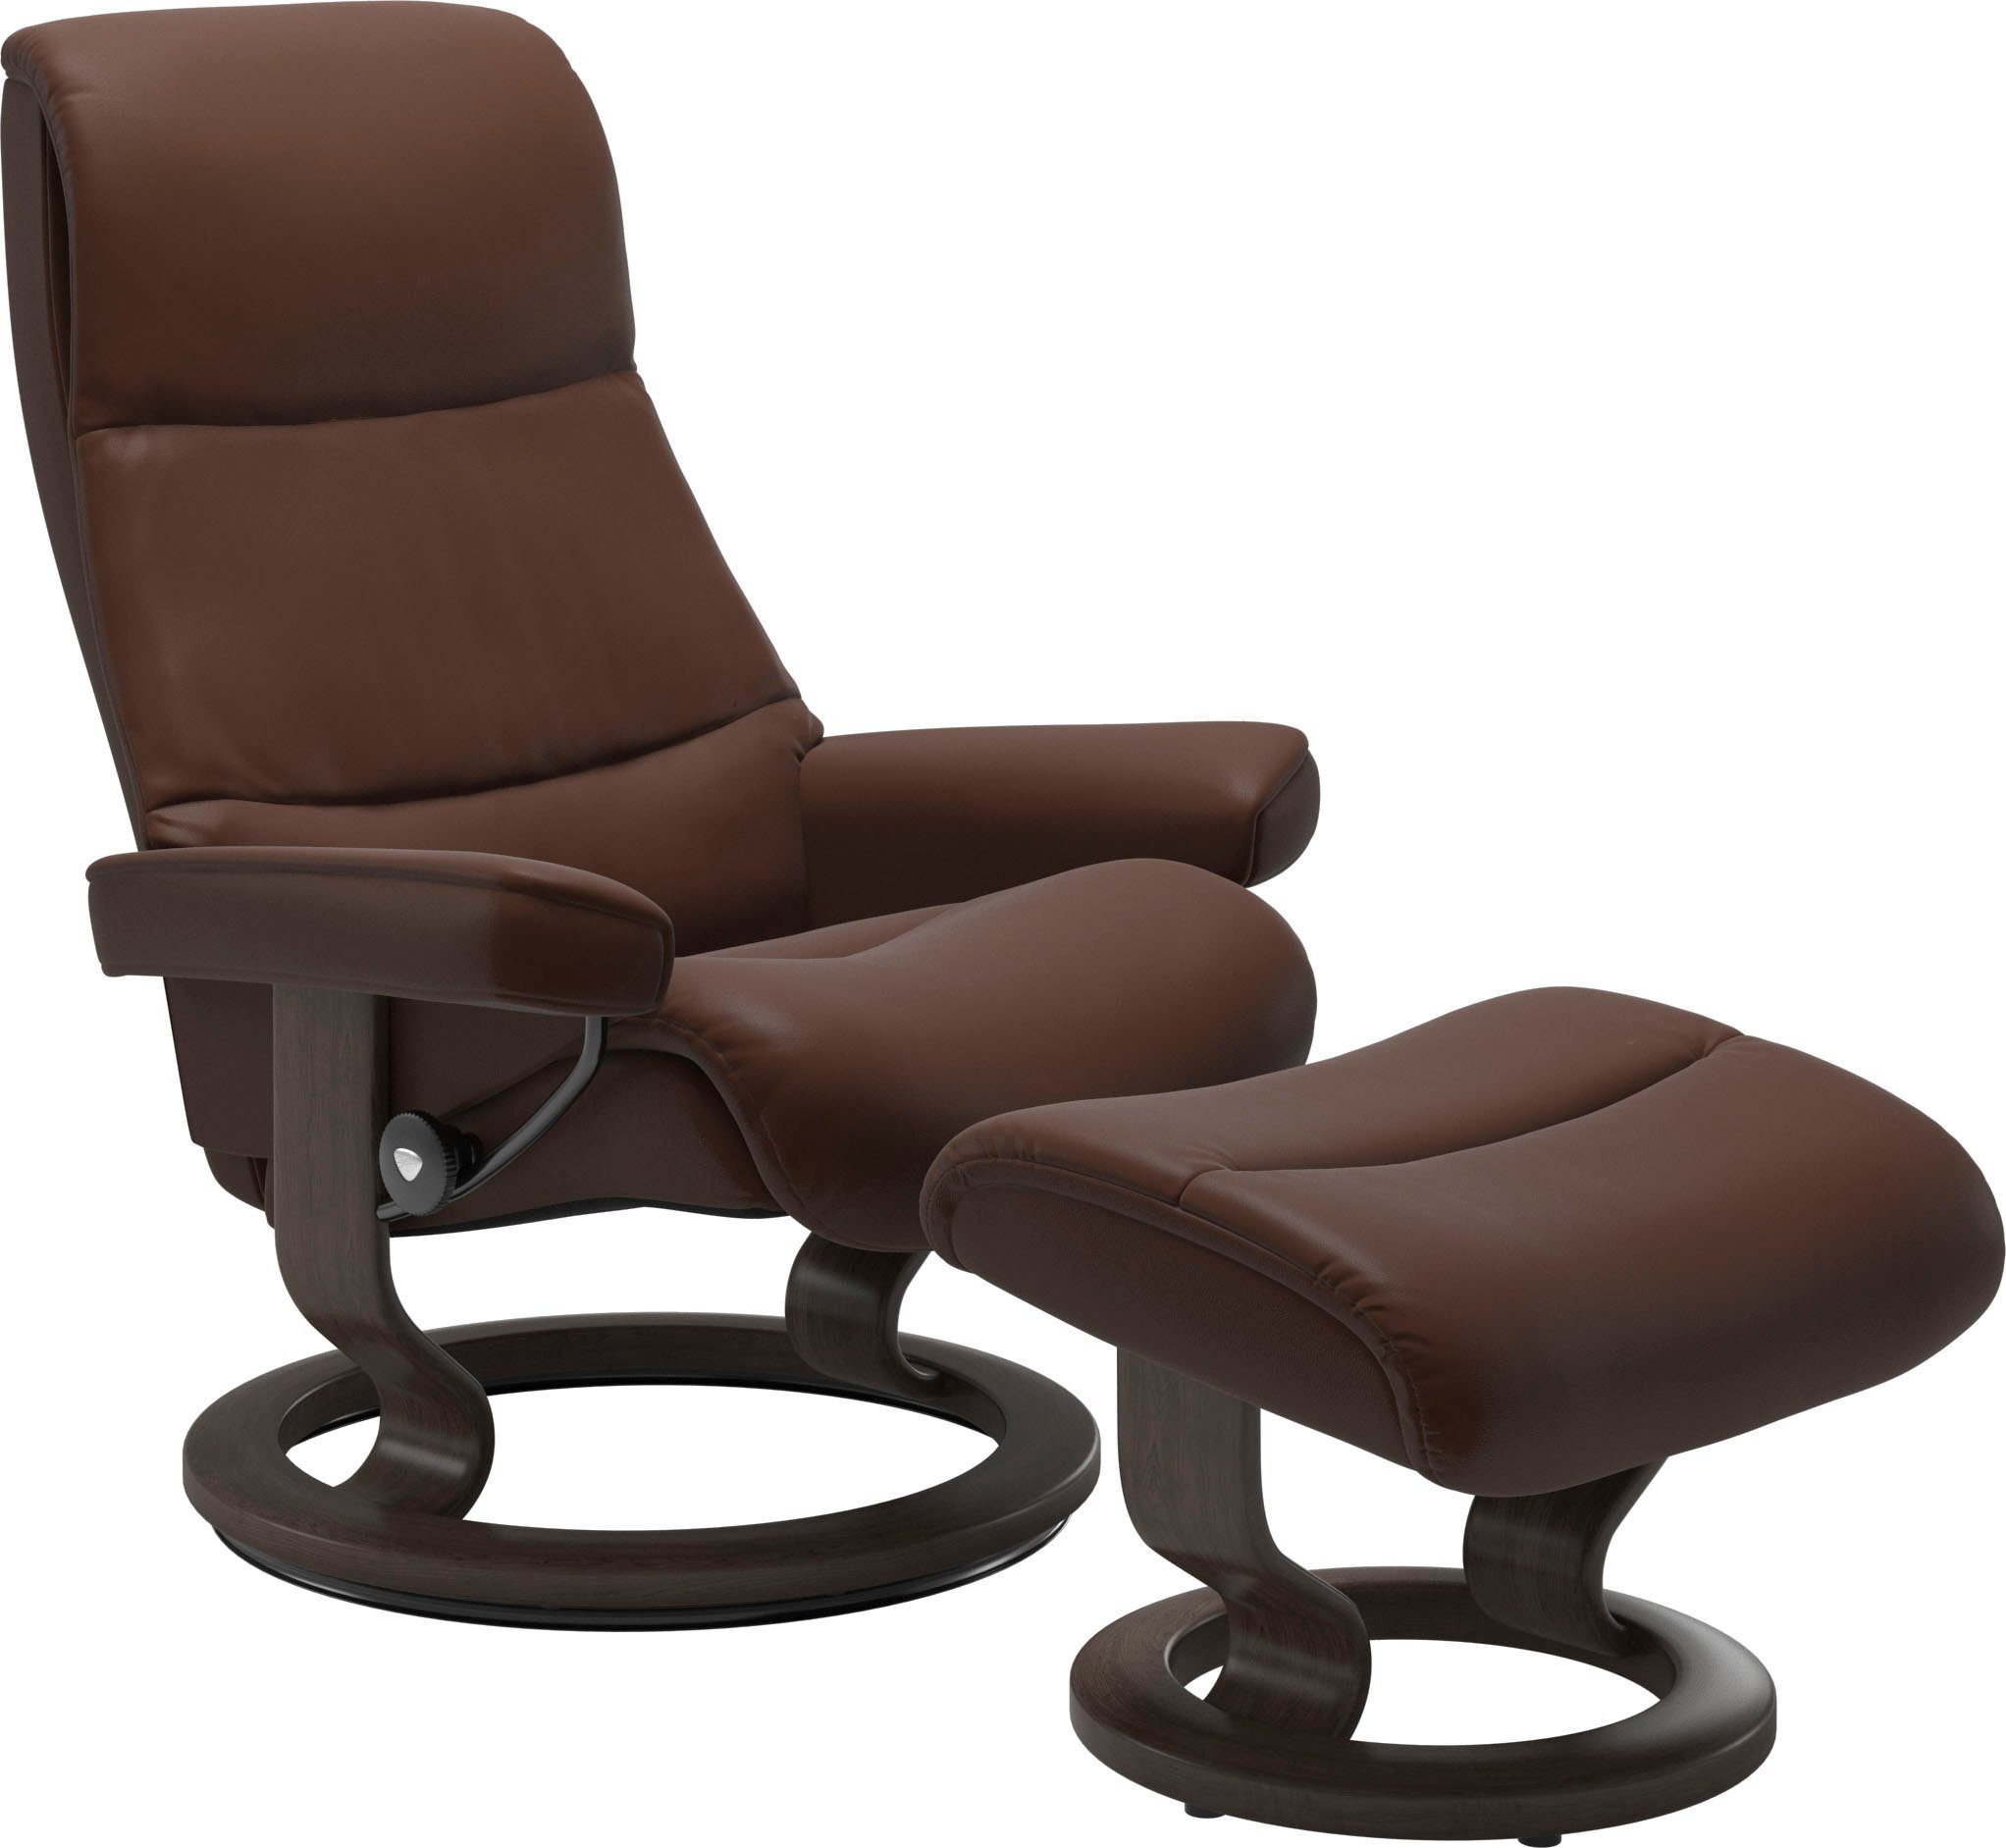 Stressless® Relaxsessel View (Set, Relaxsessel mit Hocker), mit Classic Base, Größe S,Gestell Wenge | Funktionssessel